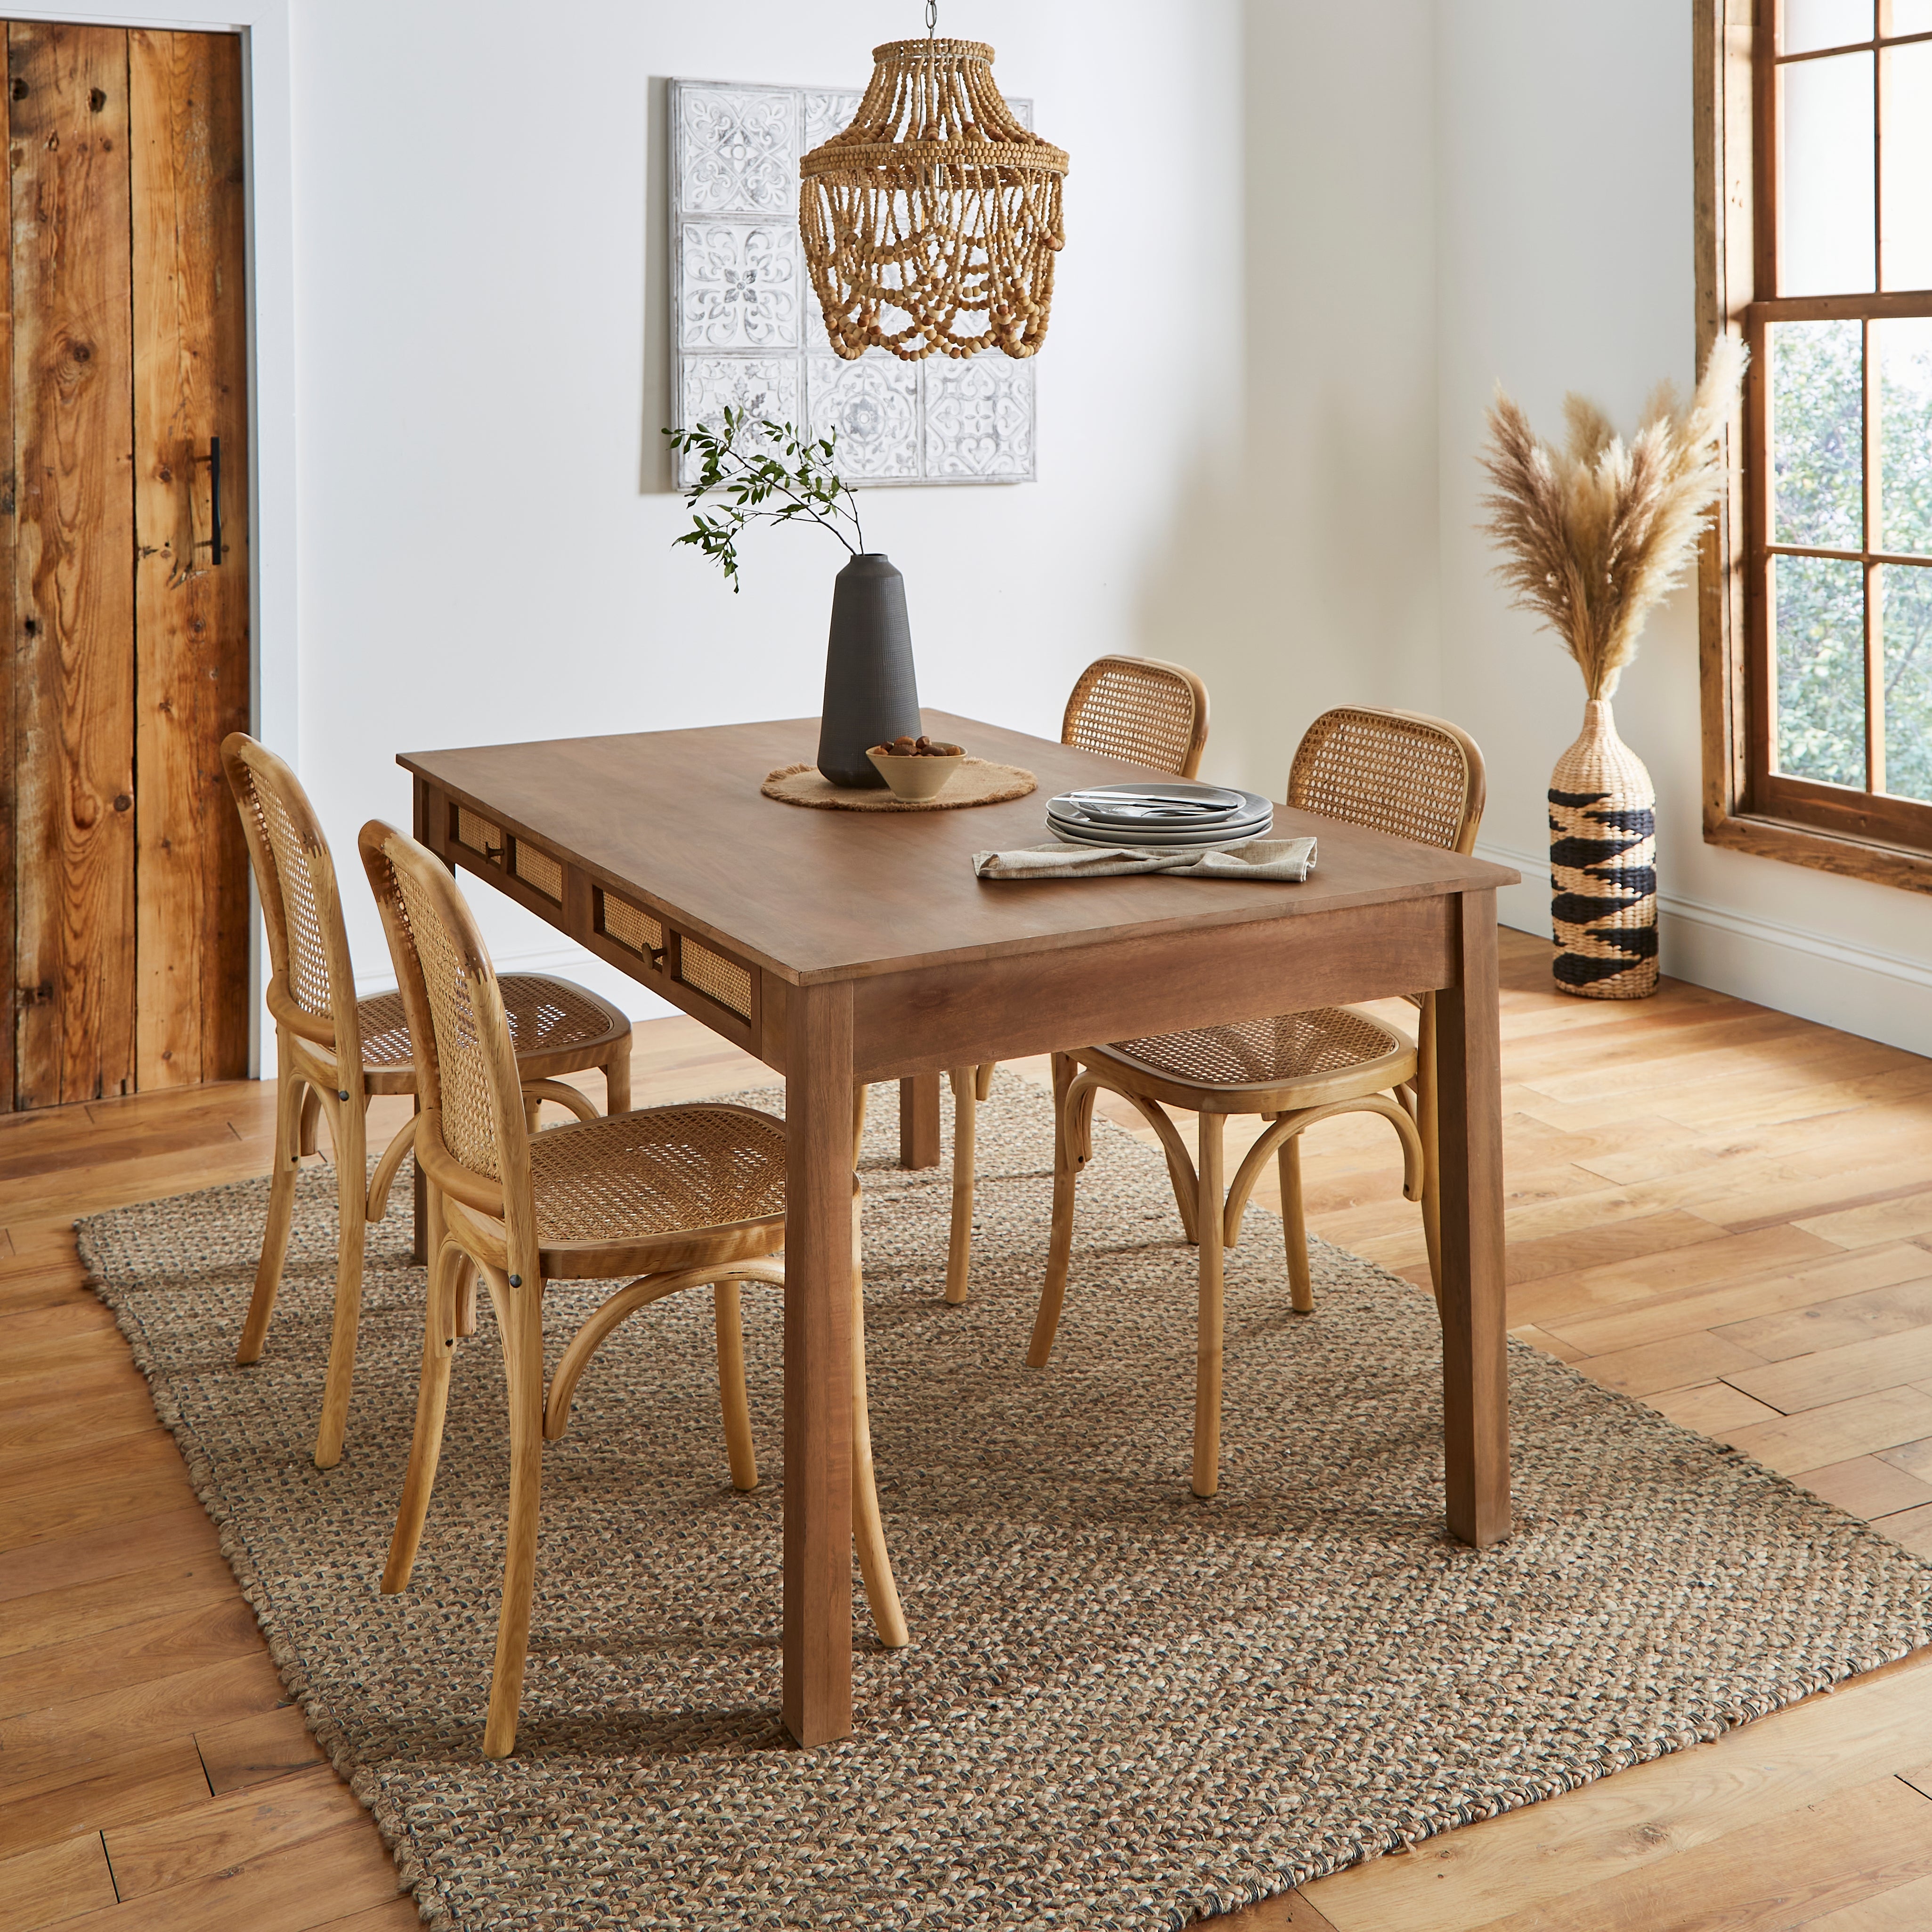 Indi Mango Wood Dining Table with Tulle Dining Chairs